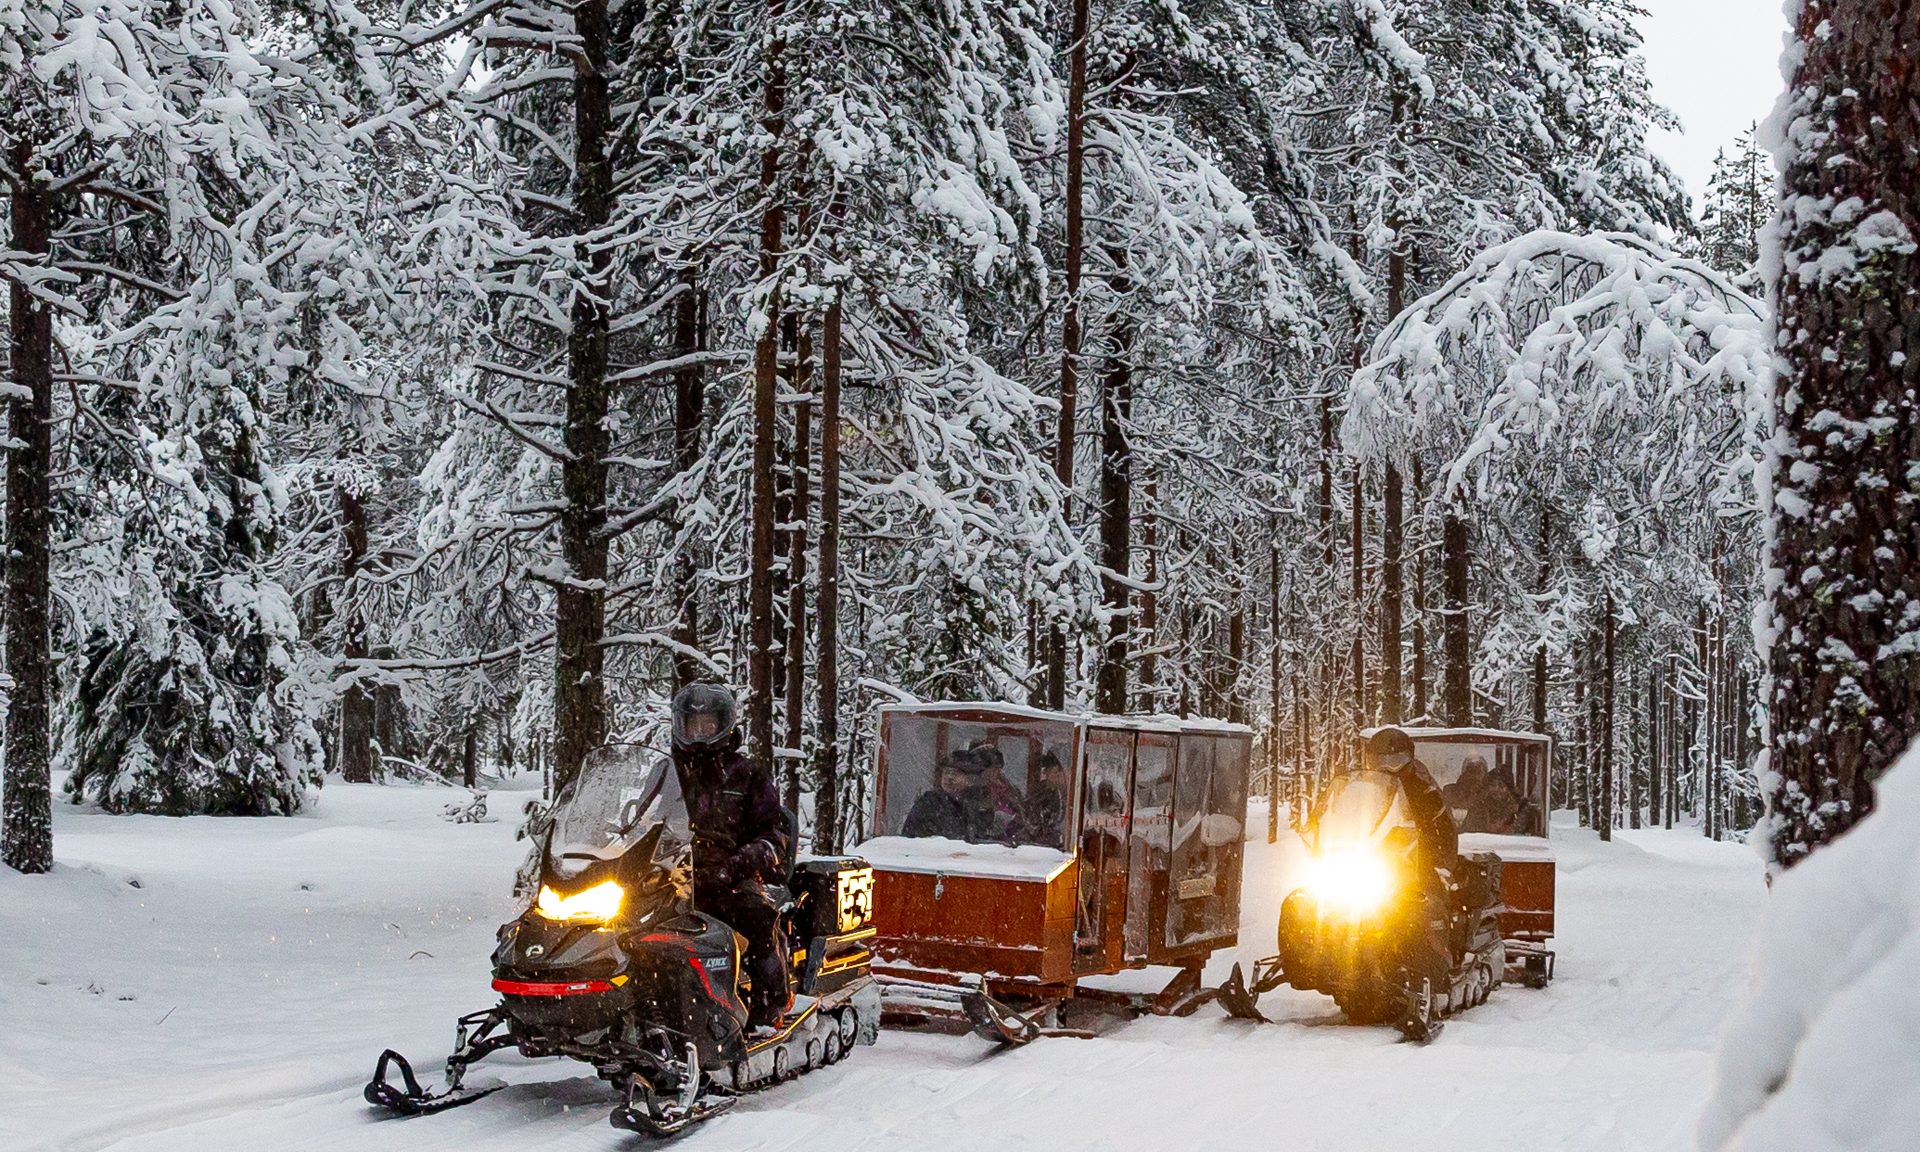 Snowmobile experience in Finnish Lapland.